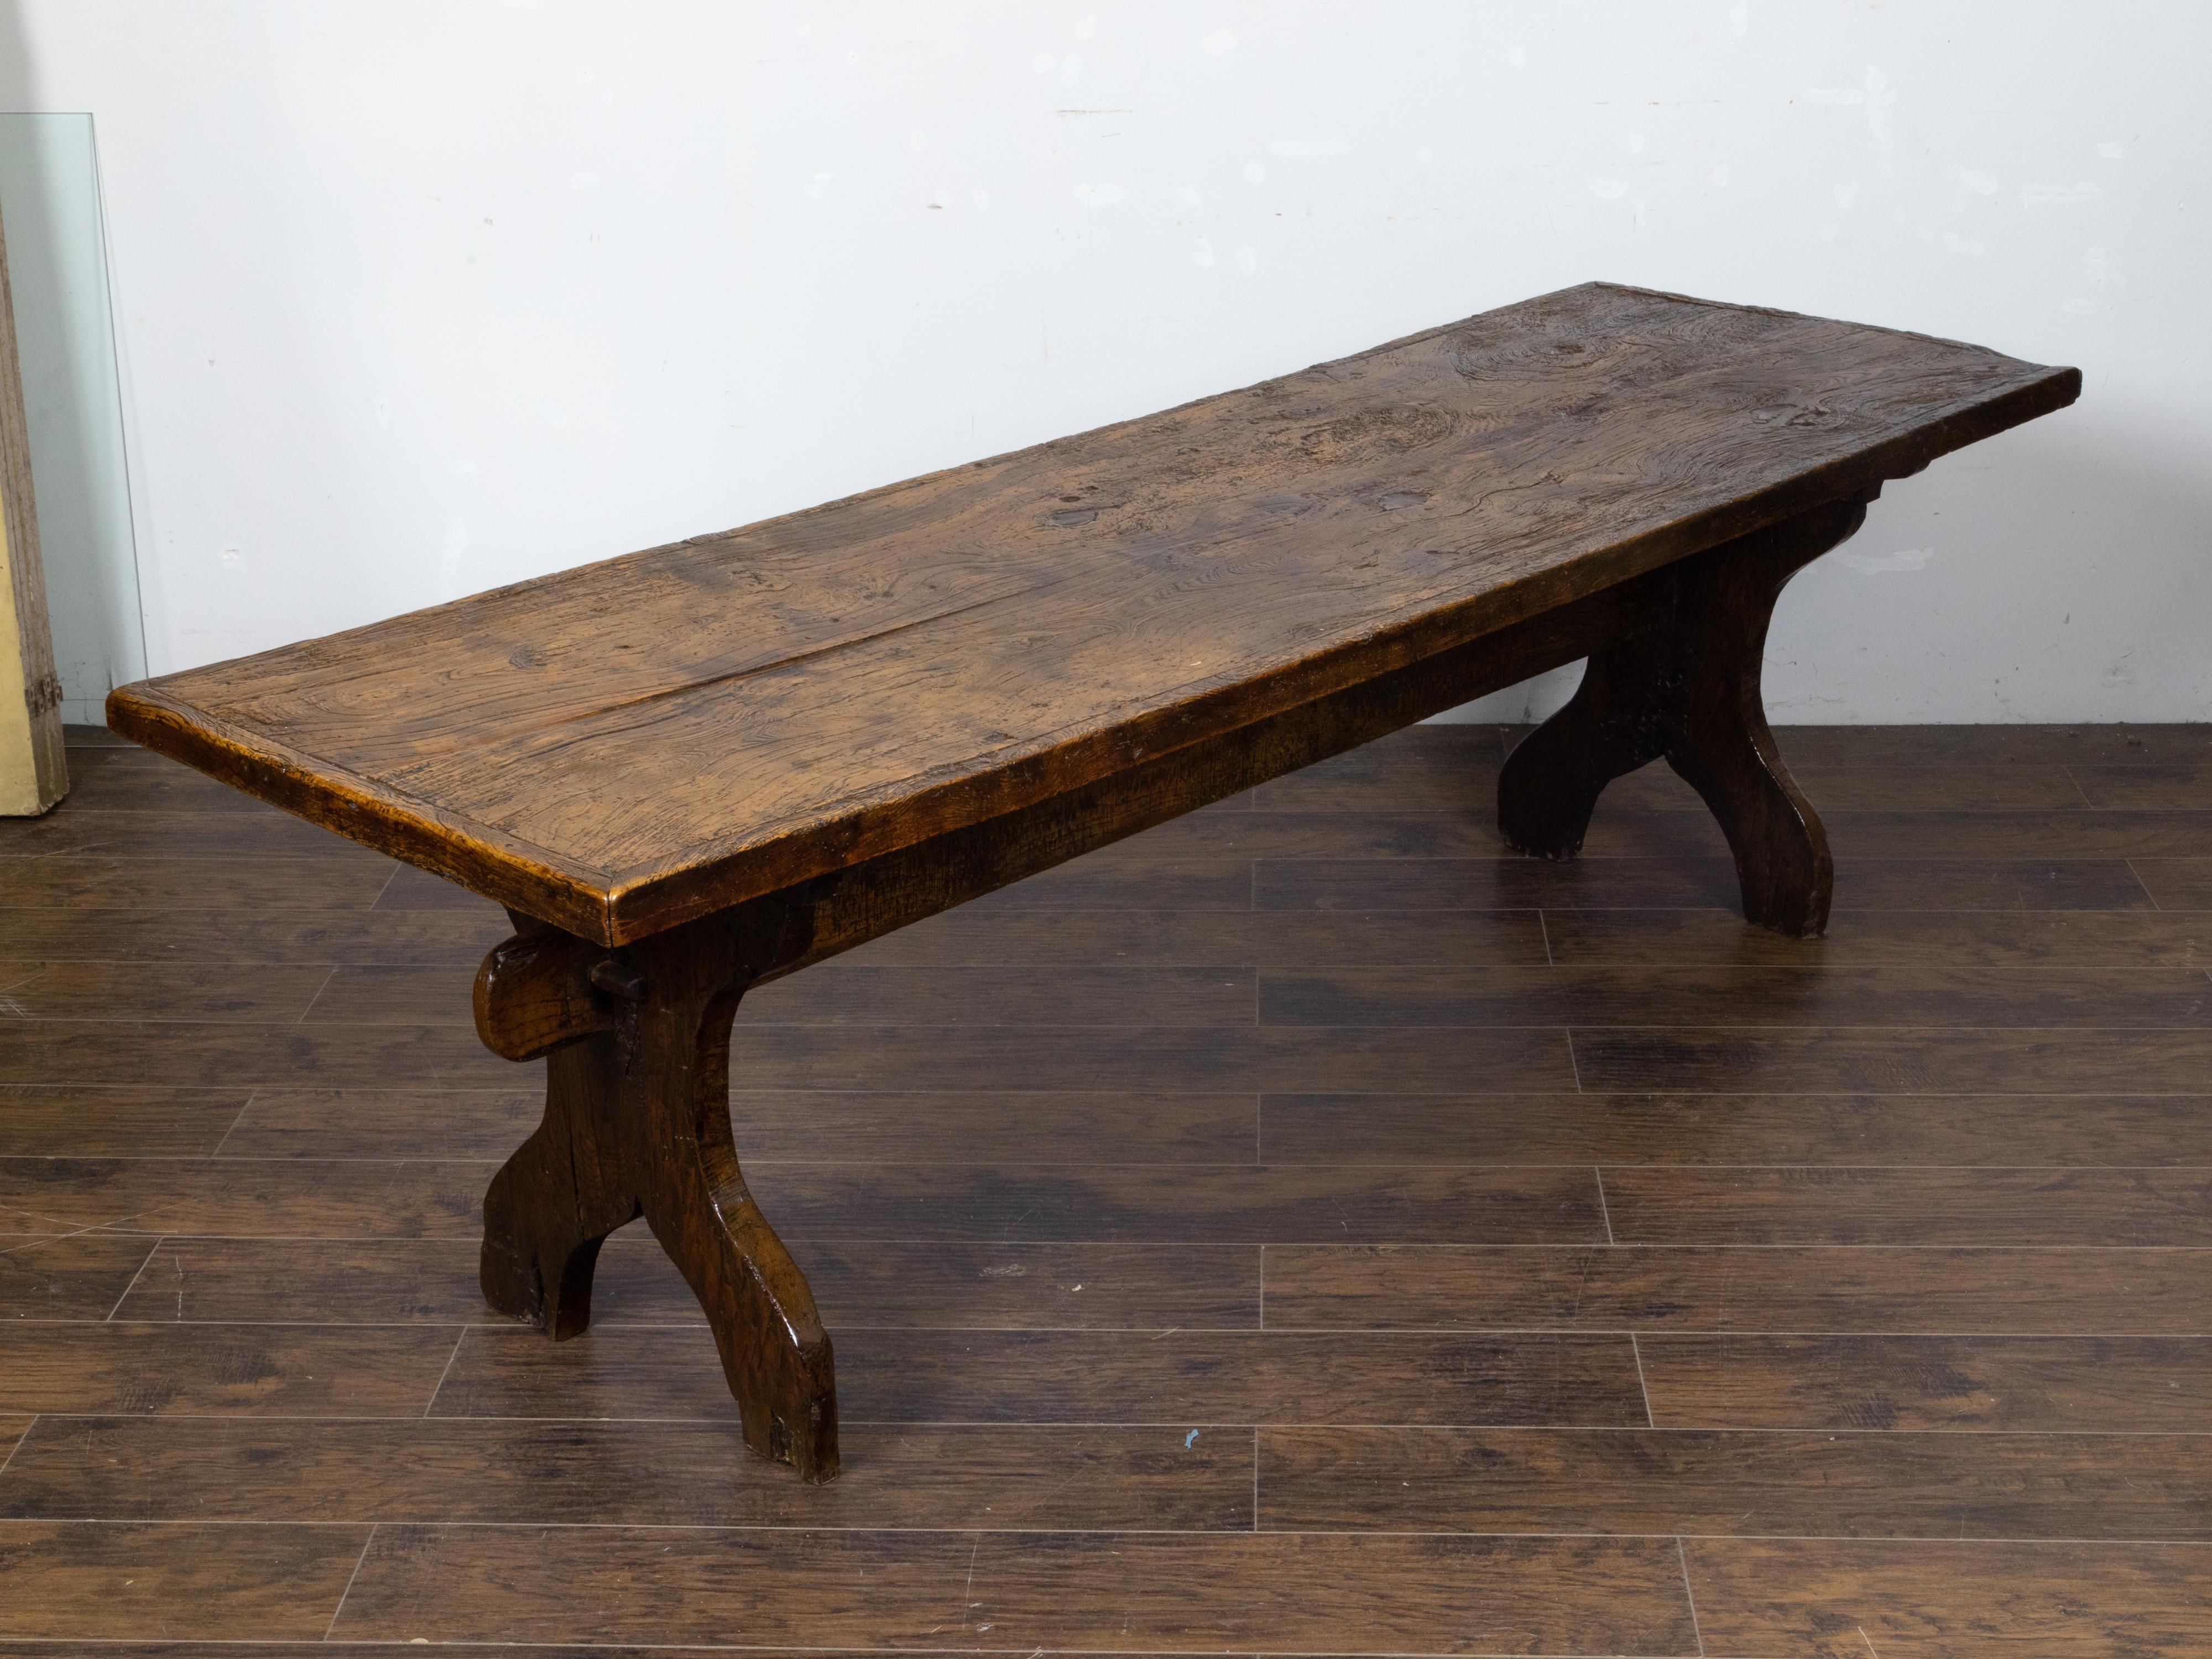 Italian 1800s Walnut Farm Table with Carved Legs, Stretcher and Weathered Patina For Sale 4